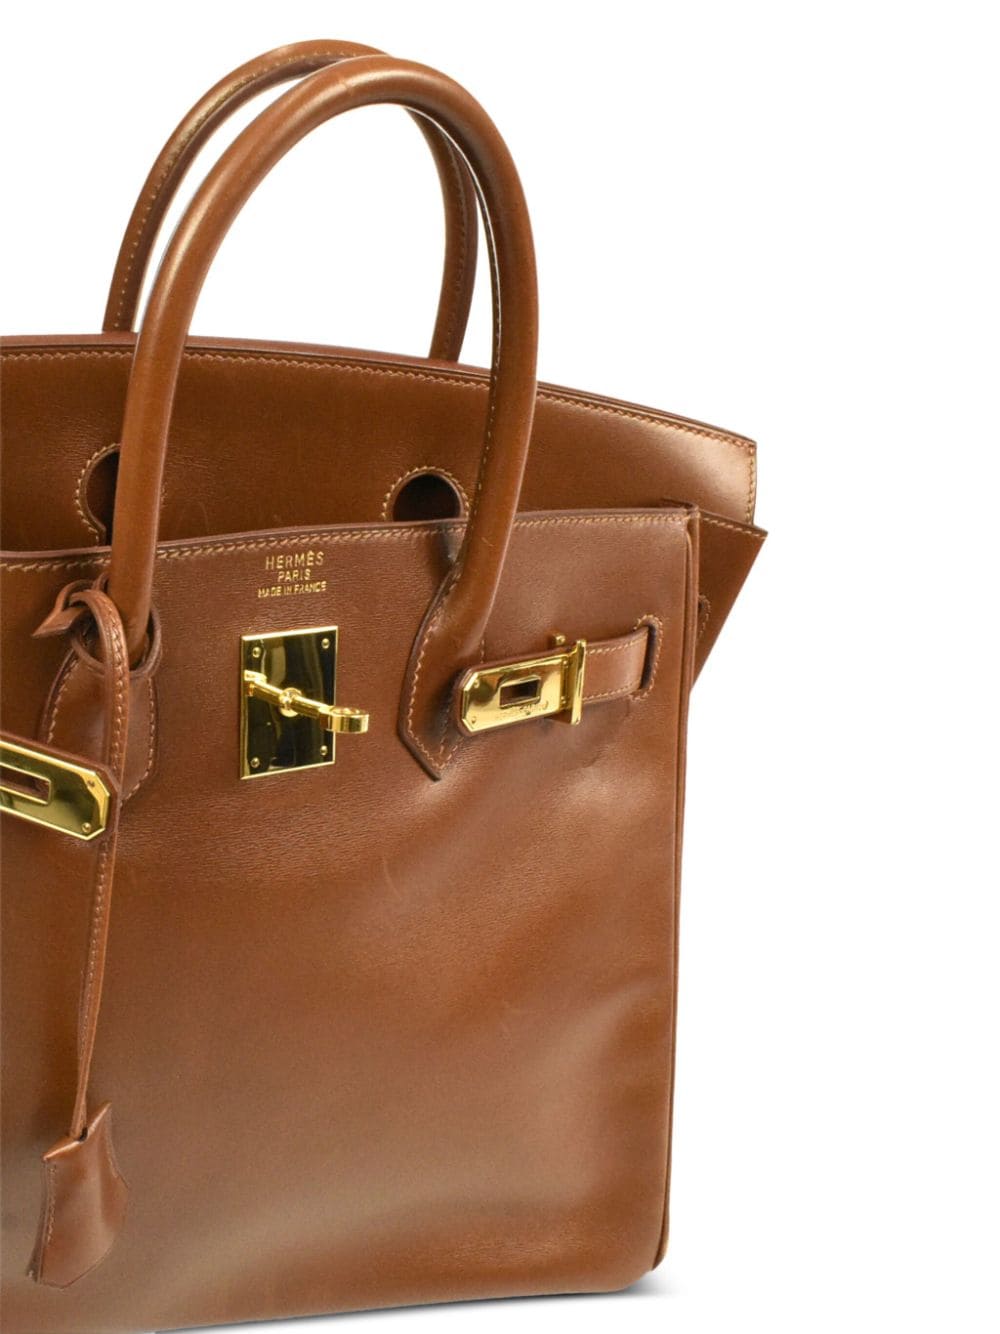 Hermes Hand Bag Haut a courroies 32 Browns Leather